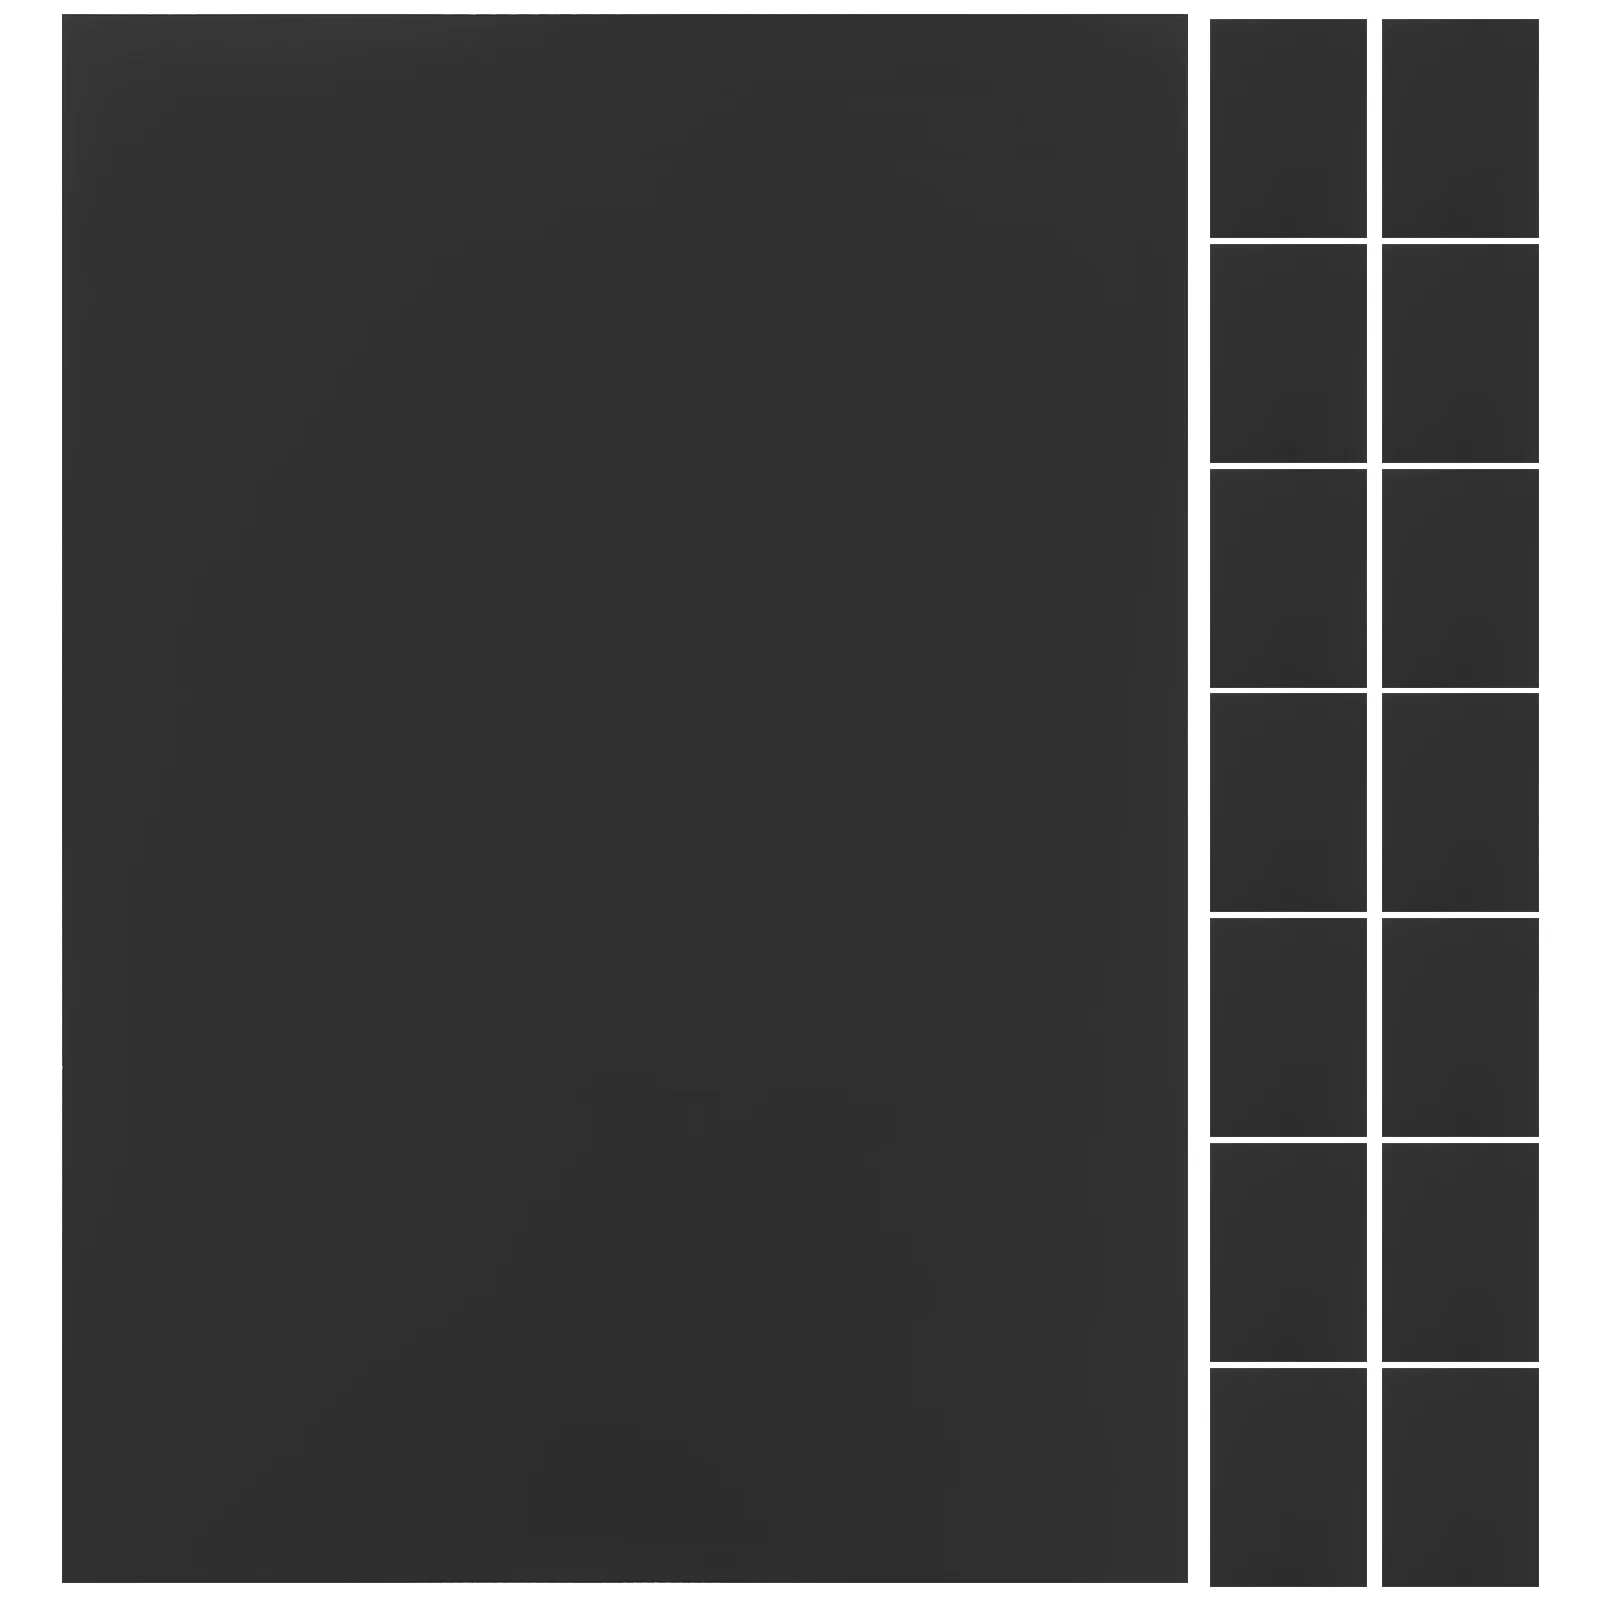 

20 Sheets Black Cardboard Paper for DIY Craft Painting Tools A4 White Cardstock Material Papers Crafts Making Drawing